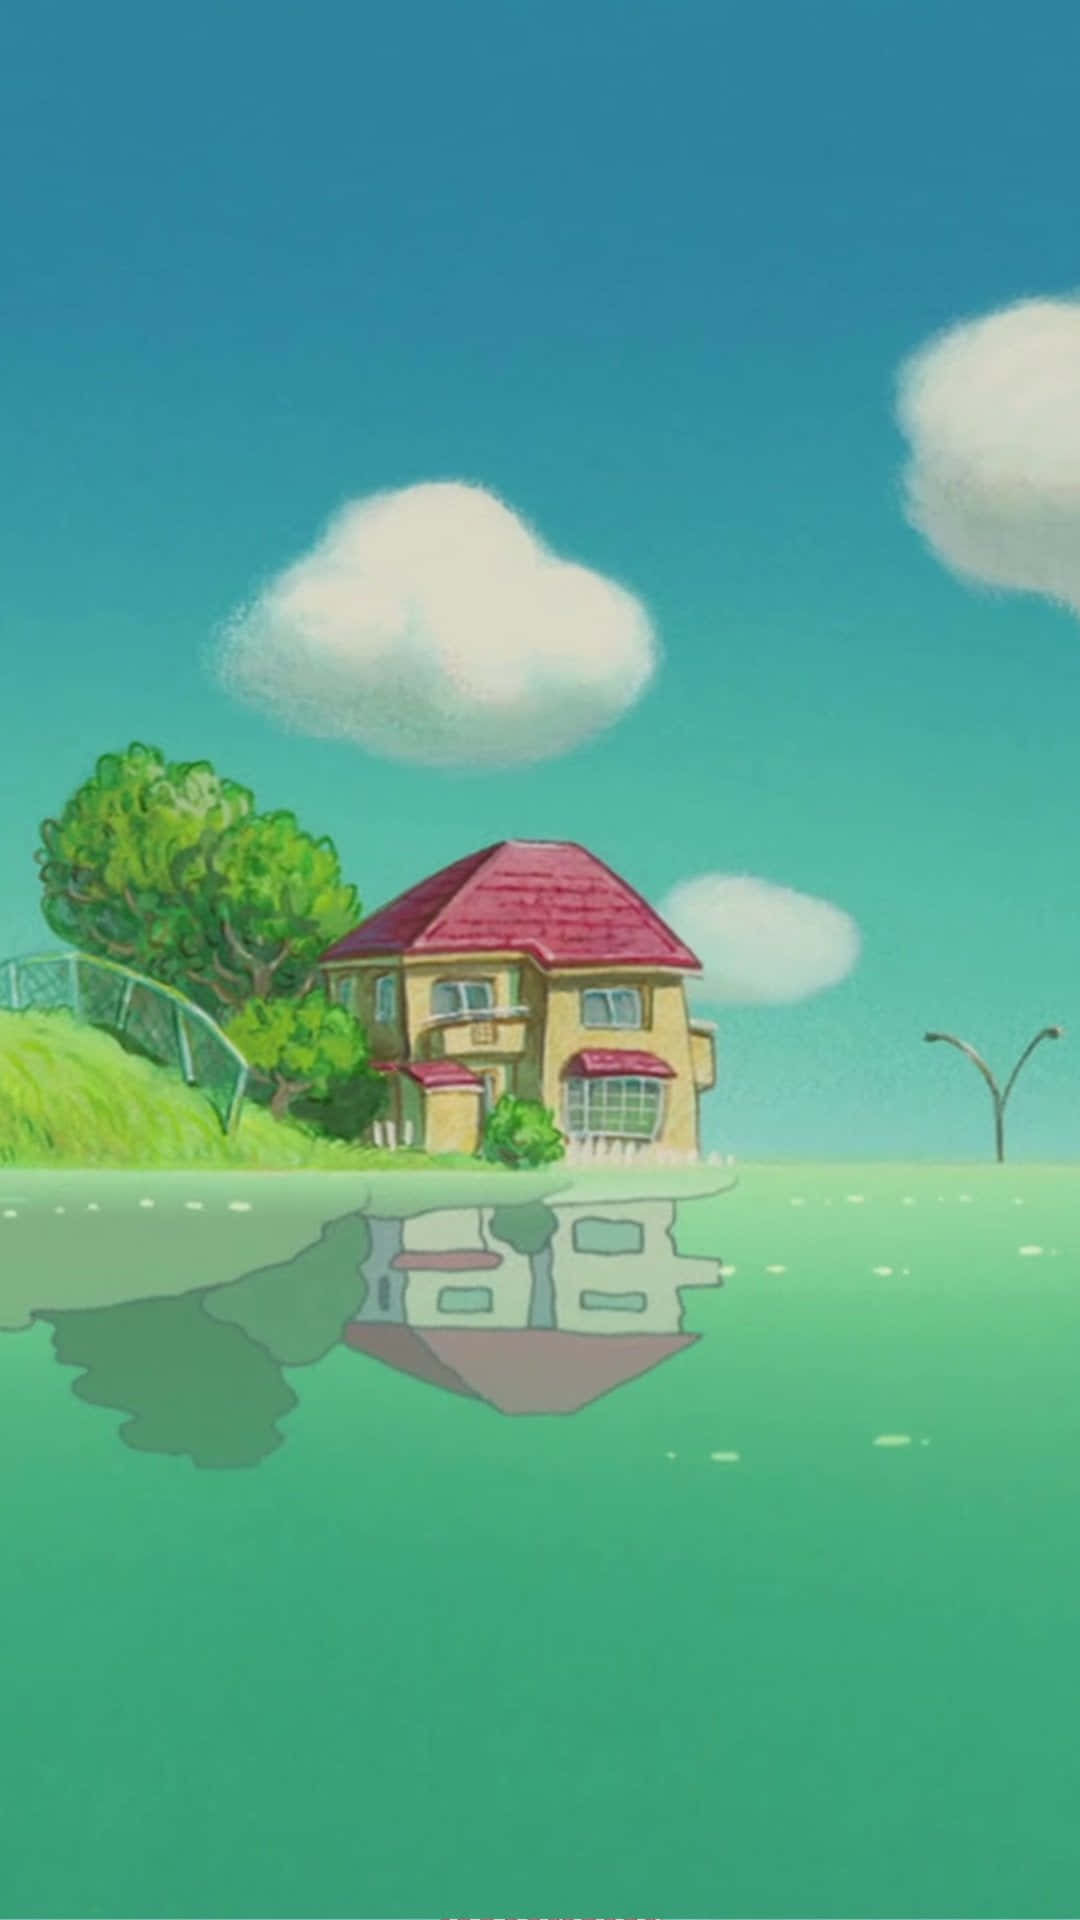 Experience The Magic Of Studio Ghibli With Your New Phone Wallpaper